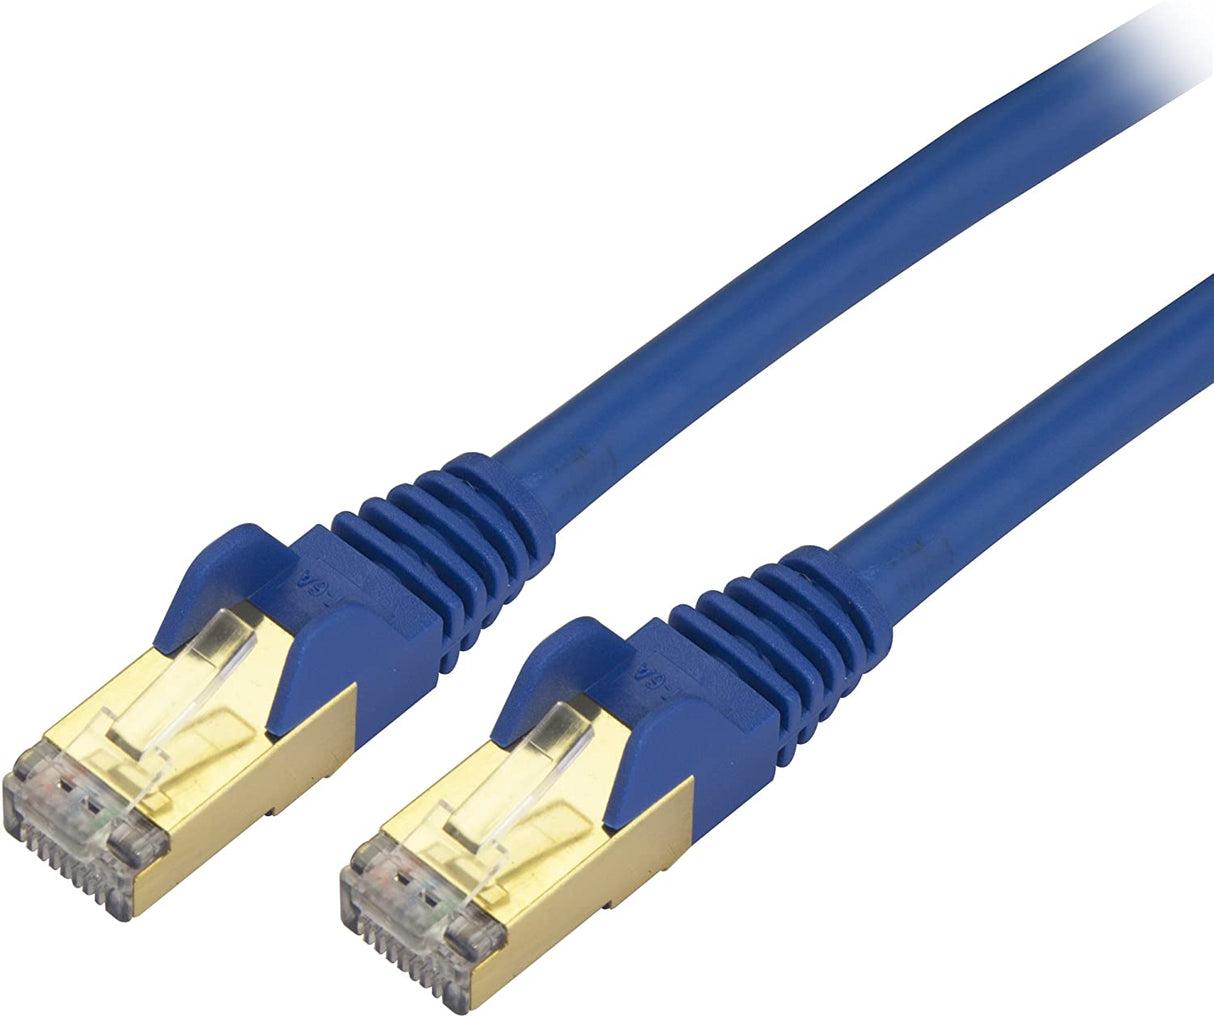 StarTech.com 8ft CAT6a Ethernet Cable - 10 Gigabit Shielded Snagless RJ45 100W PoE Patch Cord - 10GbE STP Network Cable w/Strain Relief - Blue Fluke Tested/Wiring is UL Certified/TIA (C6ASPAT8BL) 8 ft / 2.5m Blue